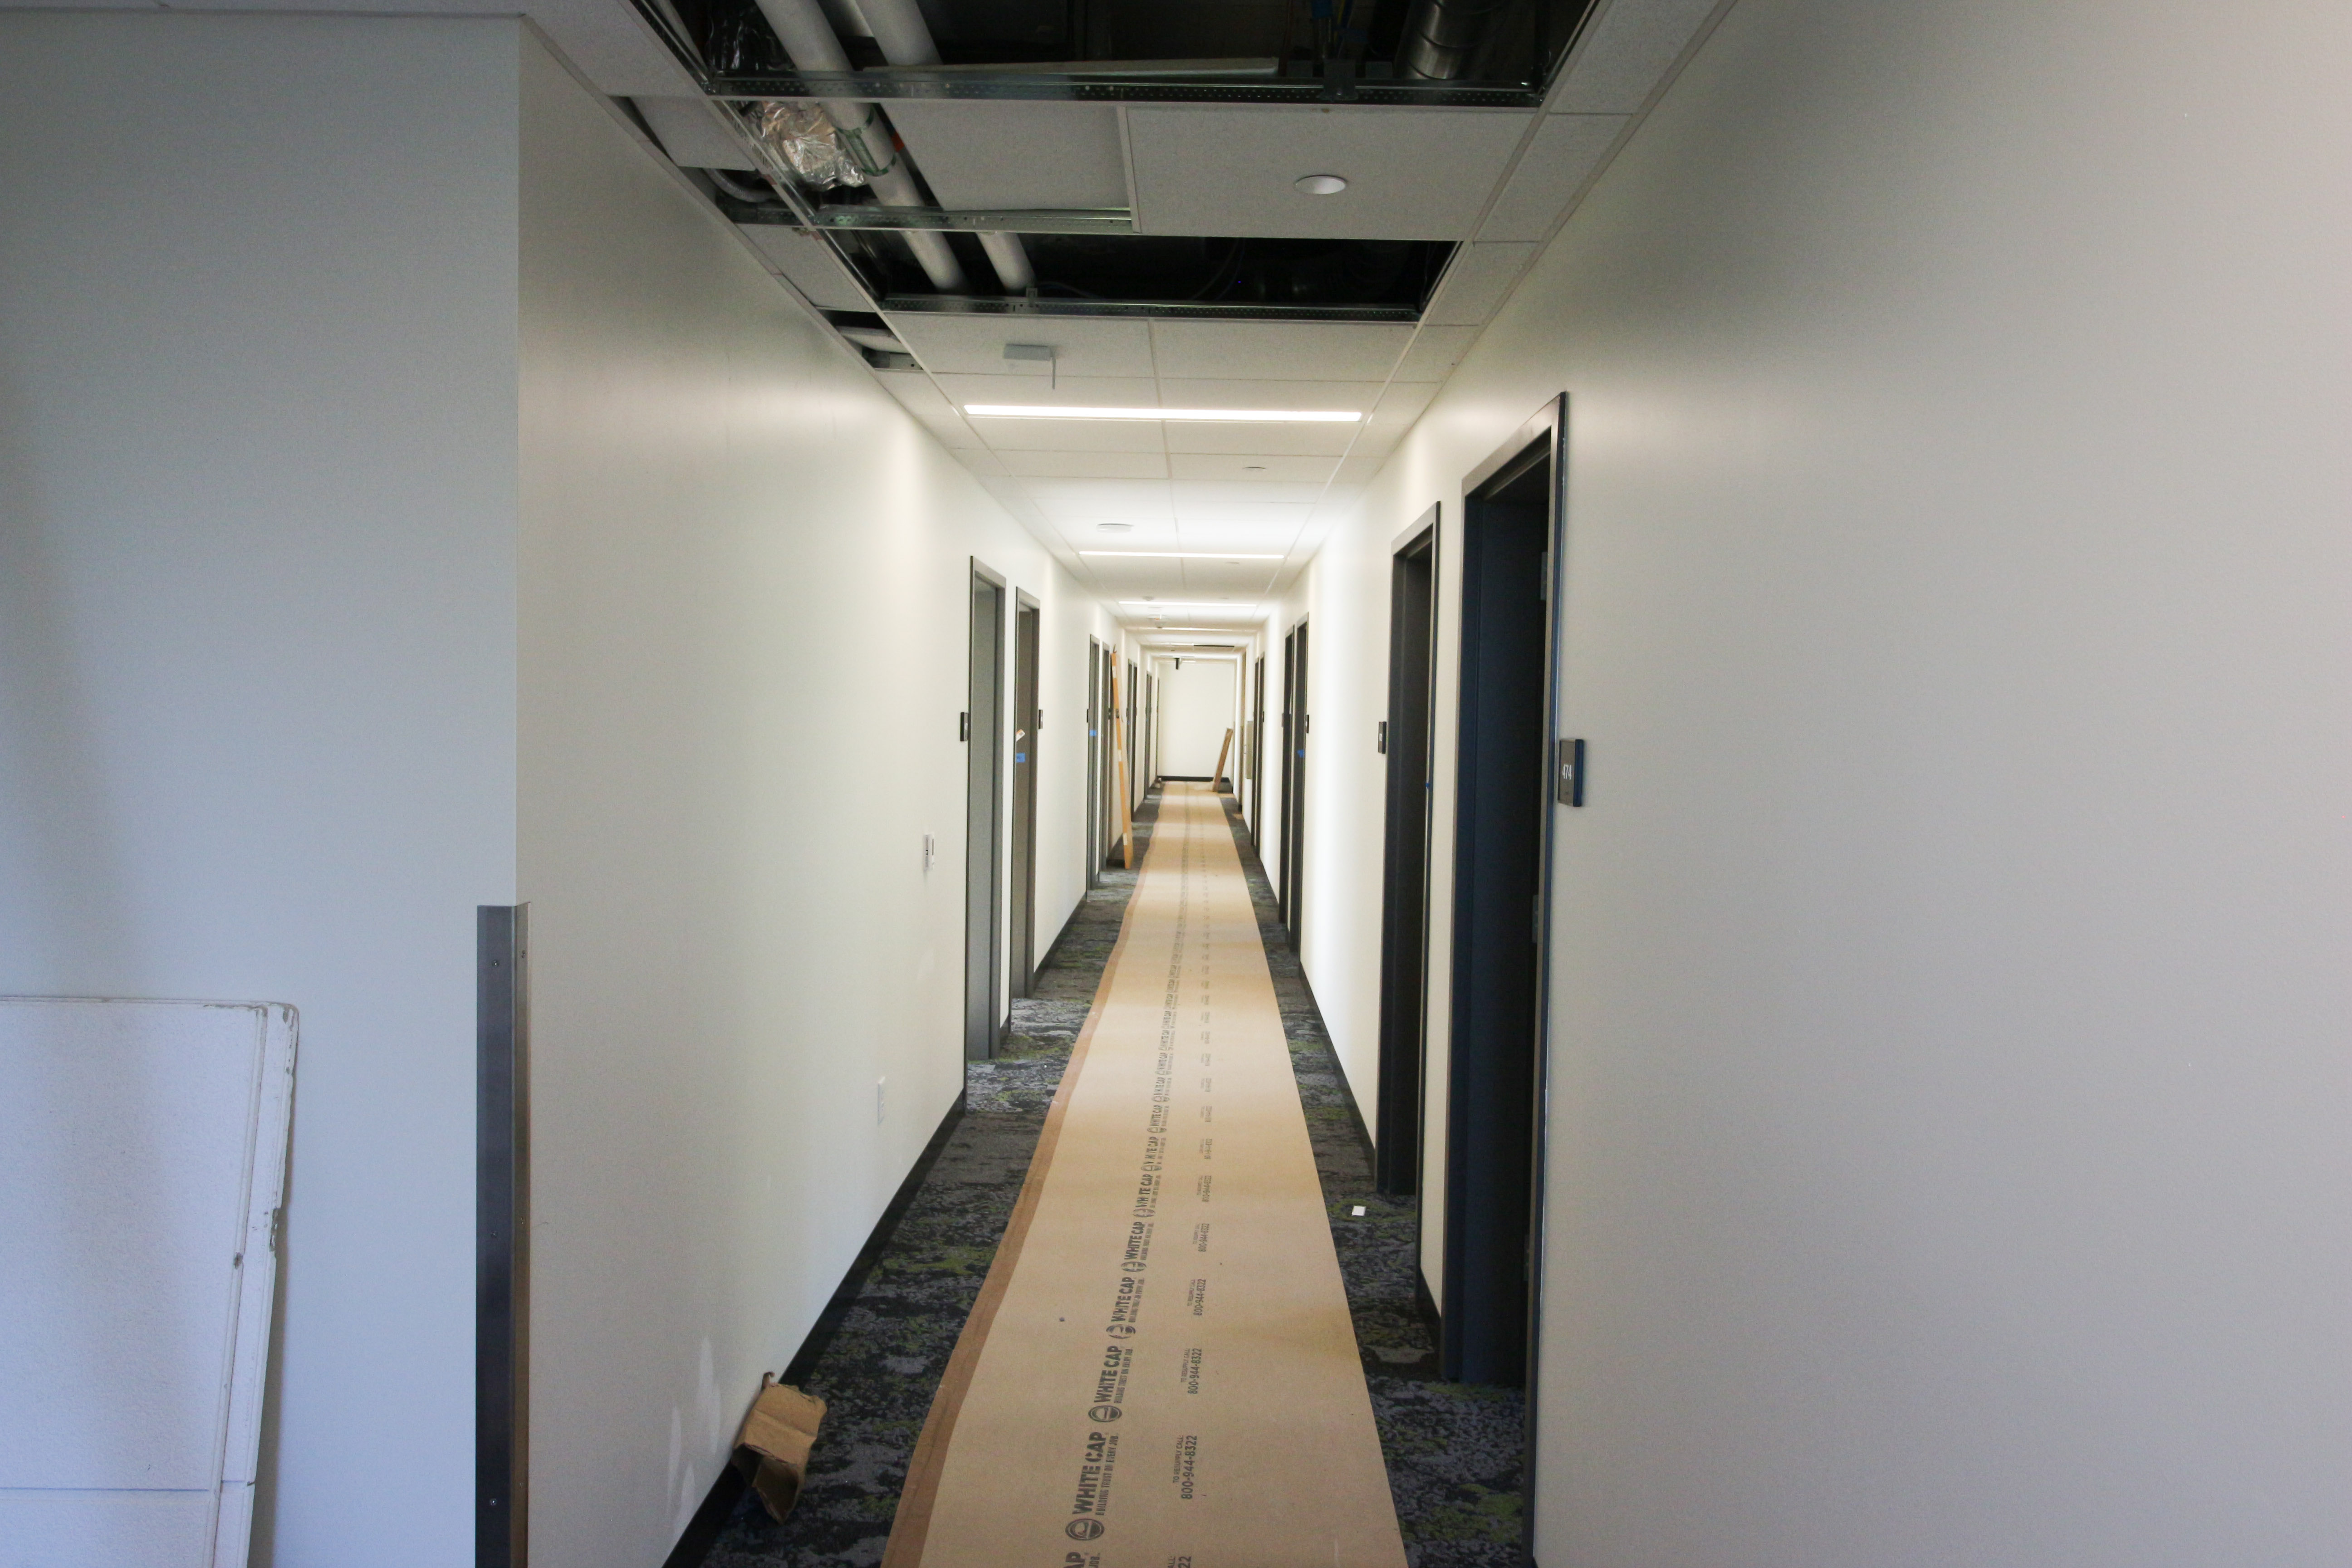 Residential hallway with doors to student rooms on both sides